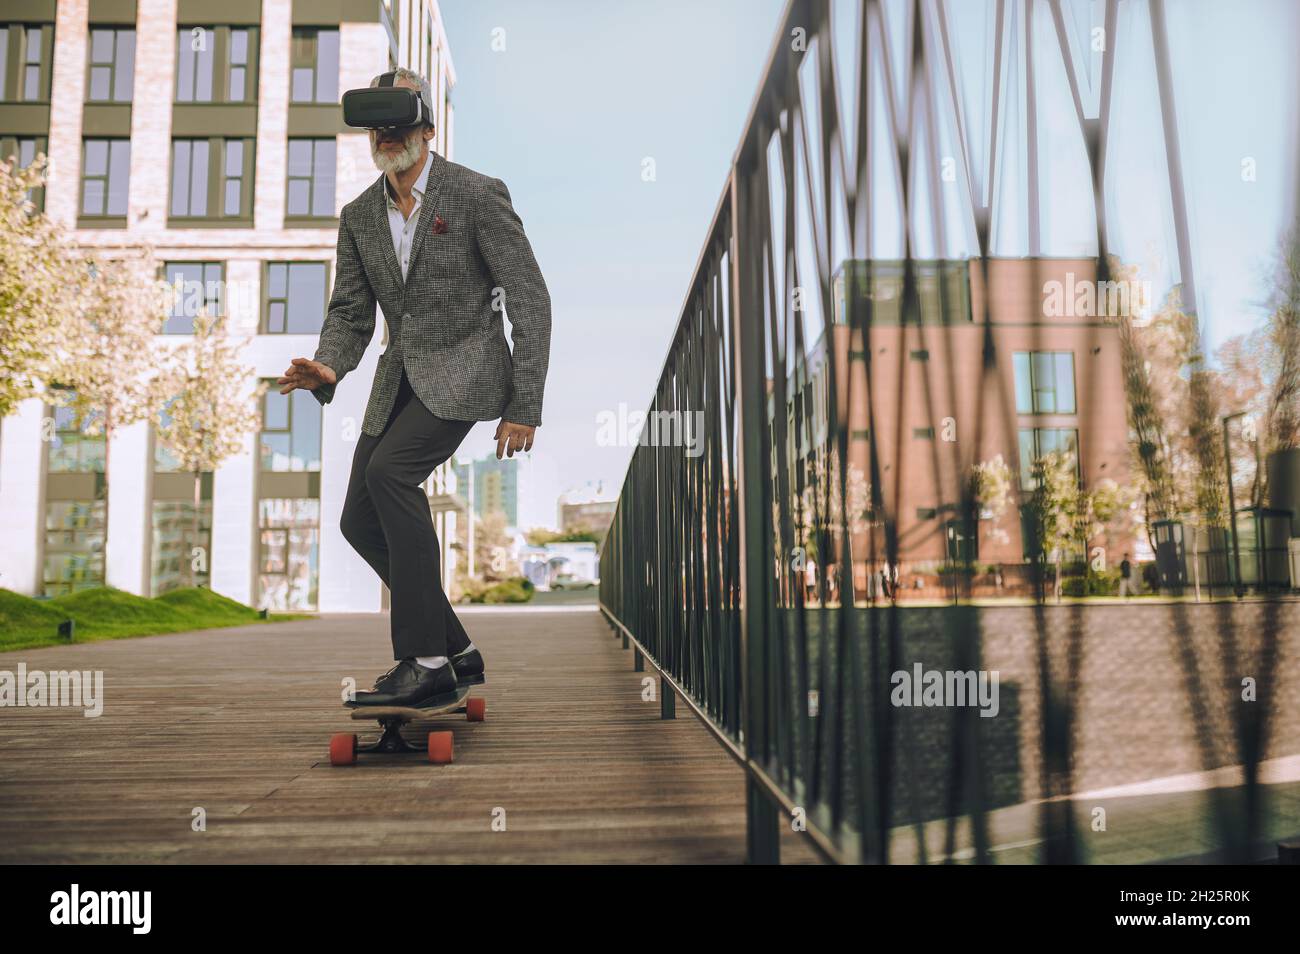 Mature Caucasian man skateboarding in the residential area Stock Photo